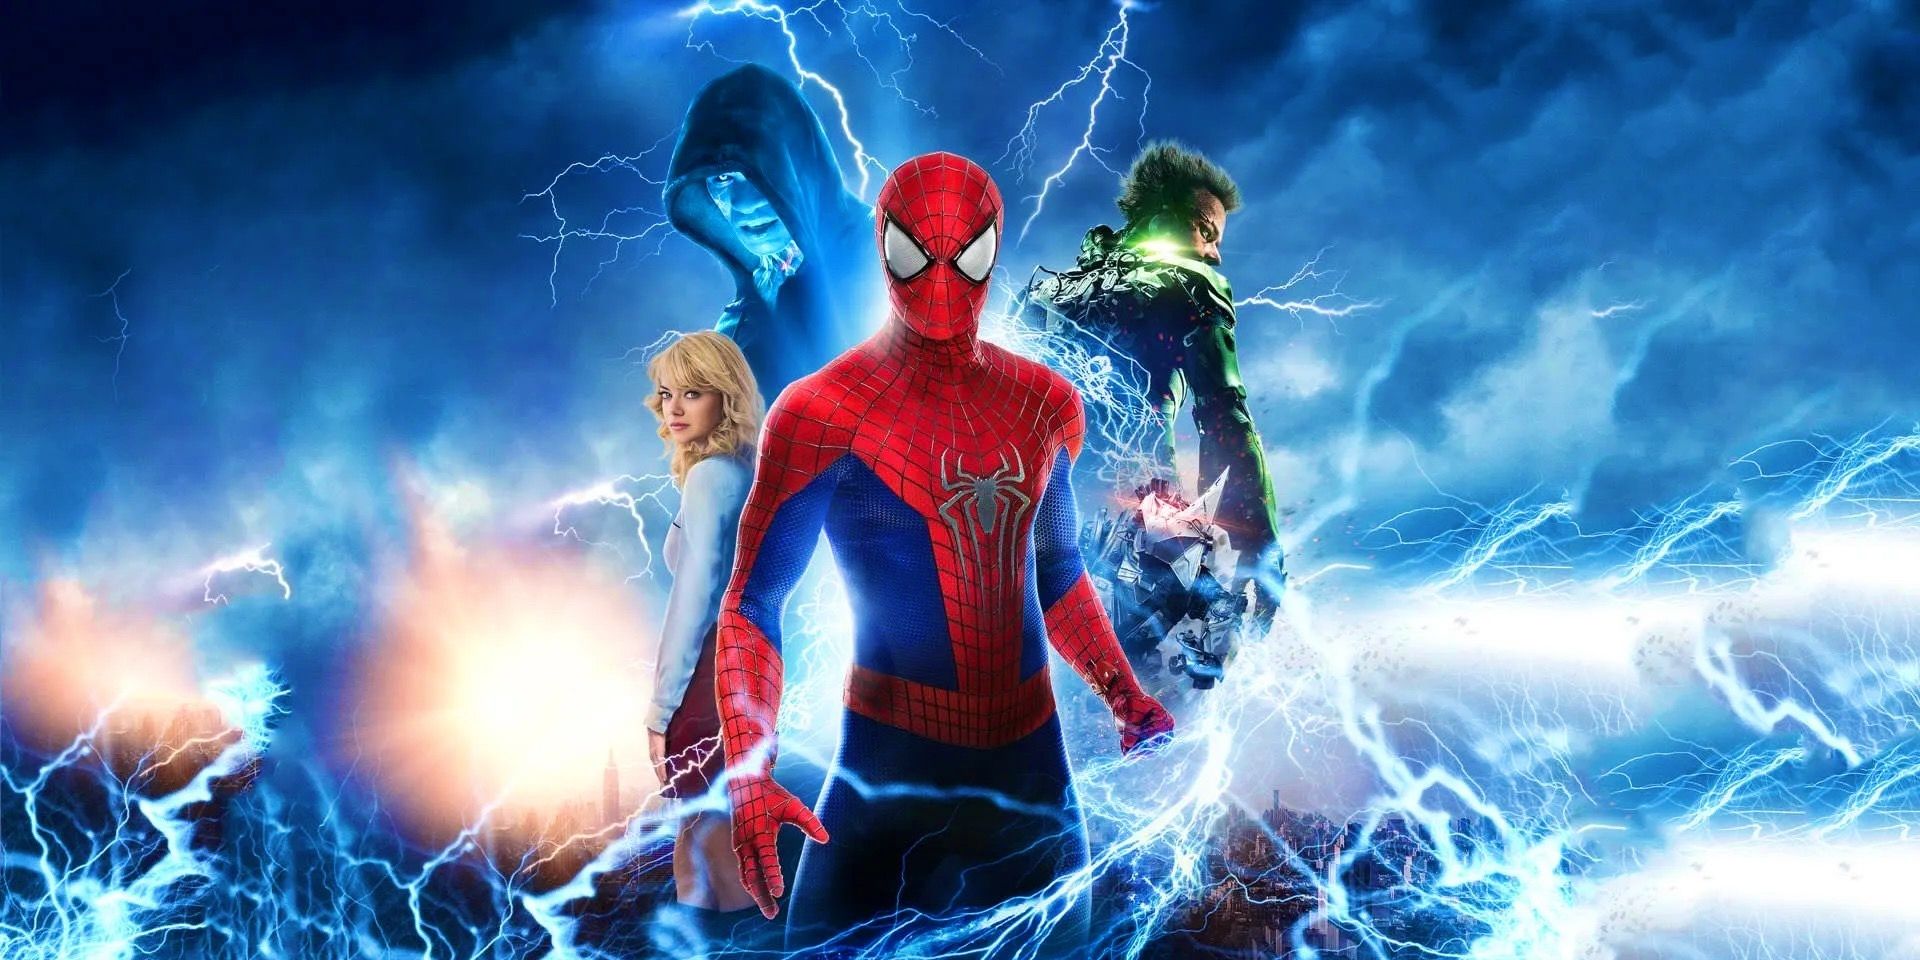 Why An Extended Cut Of The Amazing Spider-Man 2 Would Fix The Sequel